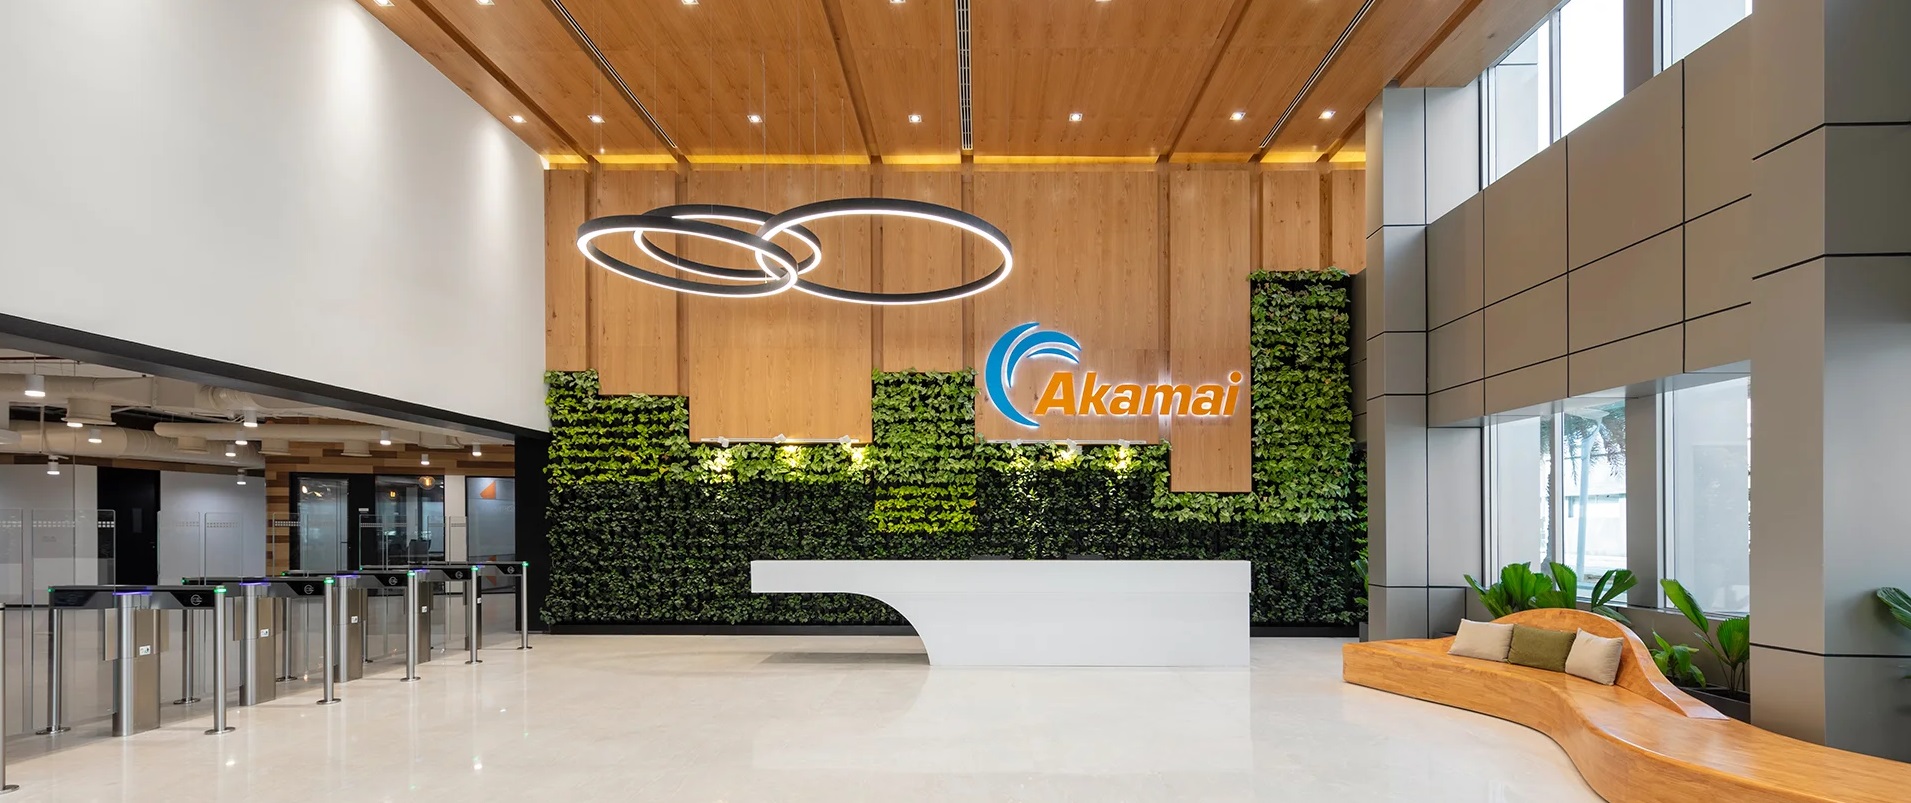 Akamai to Buy Startup Neosec for API Detection and Response